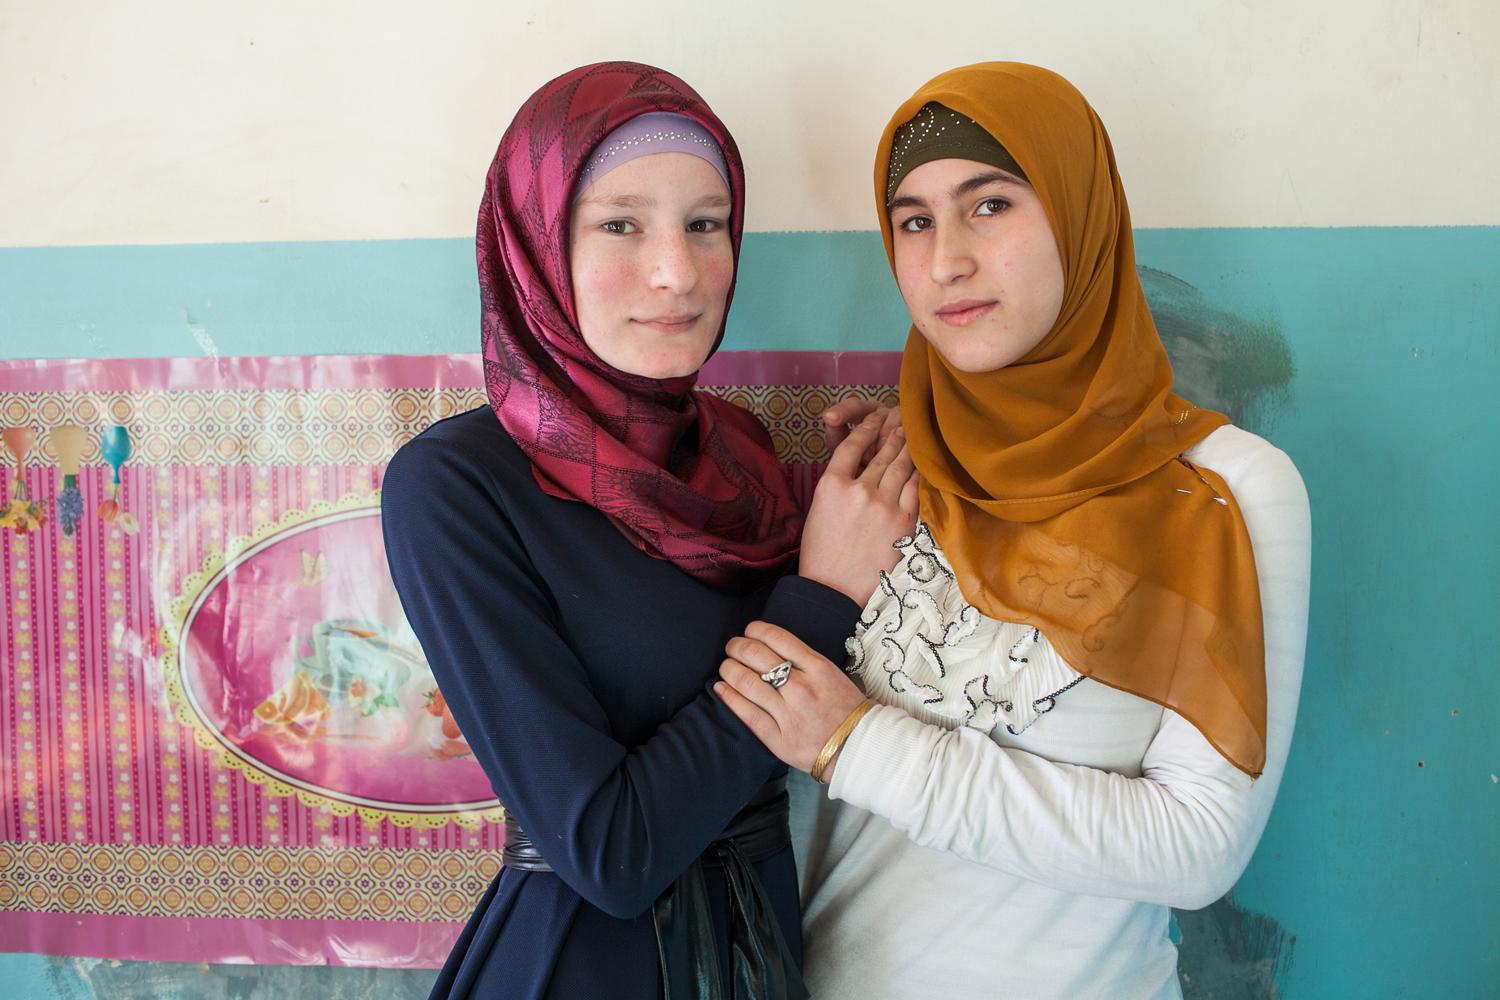 A Look Beyond the Headlines - Chechen girls posing for photo at public School. Many...